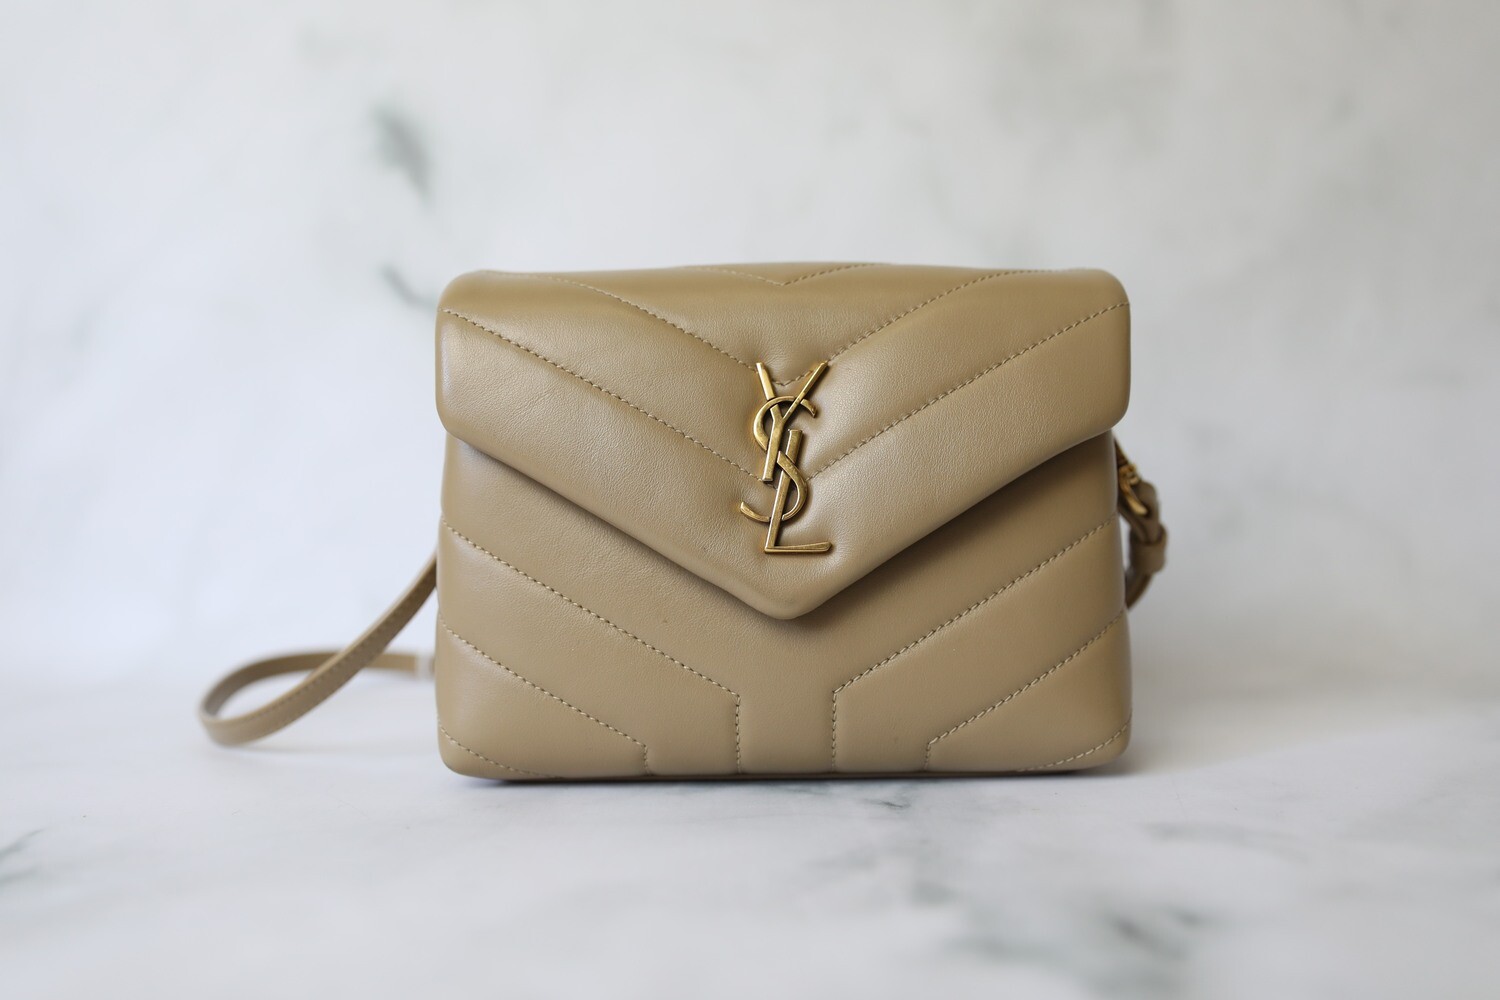 Saint Laurent LouLou Toy, Beige with Gold Hardware, Preowned in